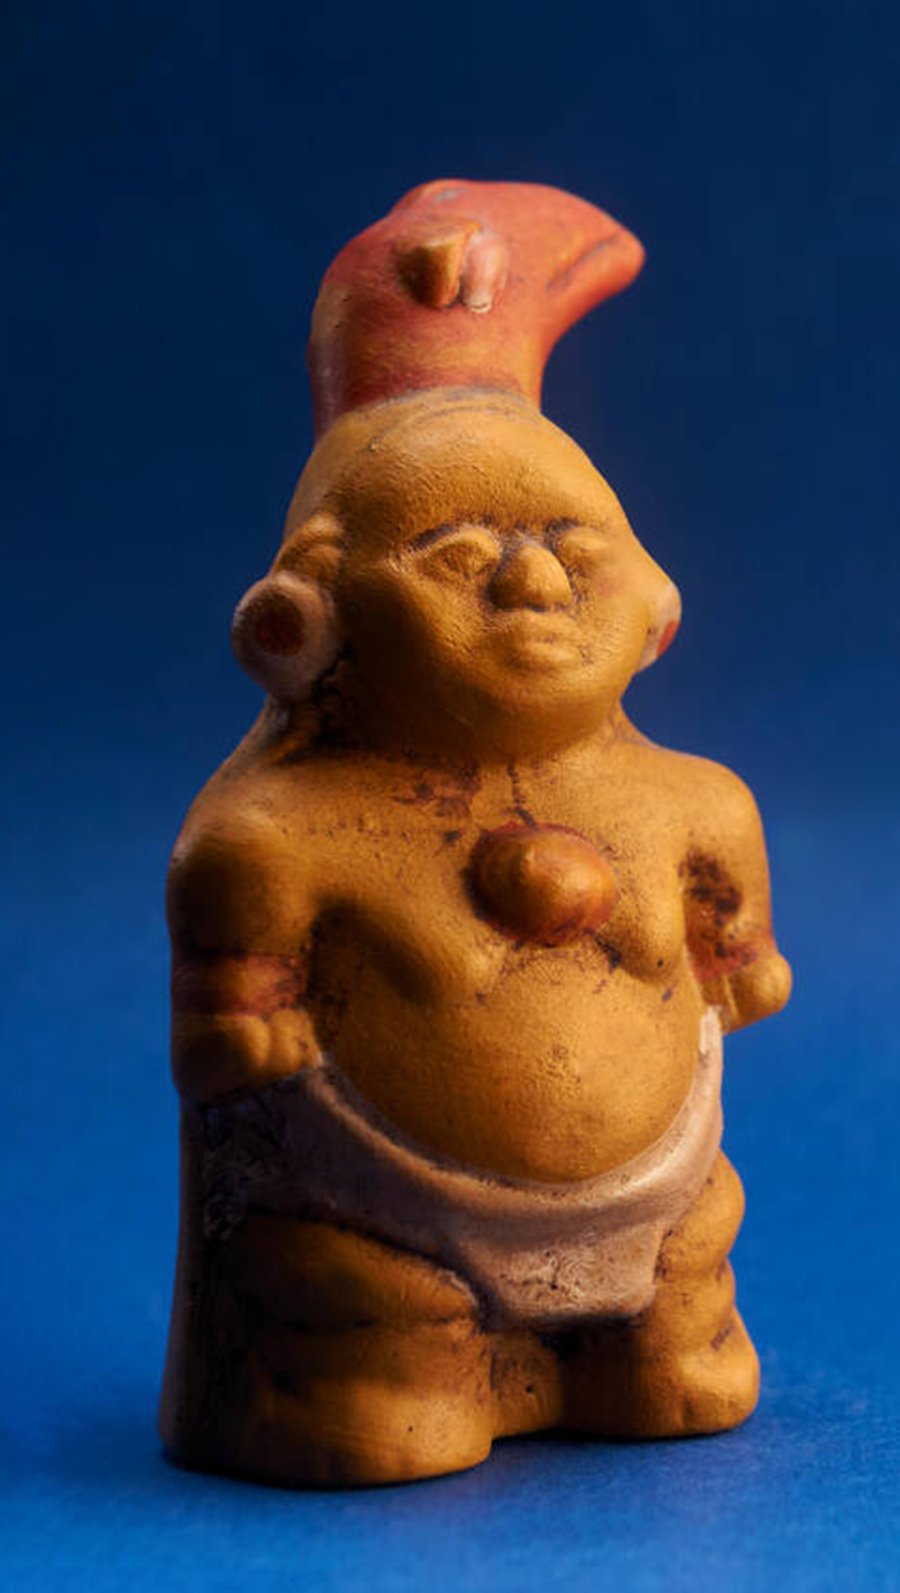 A photo of a small figurine depicting a chanque, a mythical little creature. The figurine is made of terracotta and has a round body and head. The chaneque is wearing a necklace and a loin cloth. The body of the figurine is covered in a brownish-yellow glaze. The background is a solid blue color.